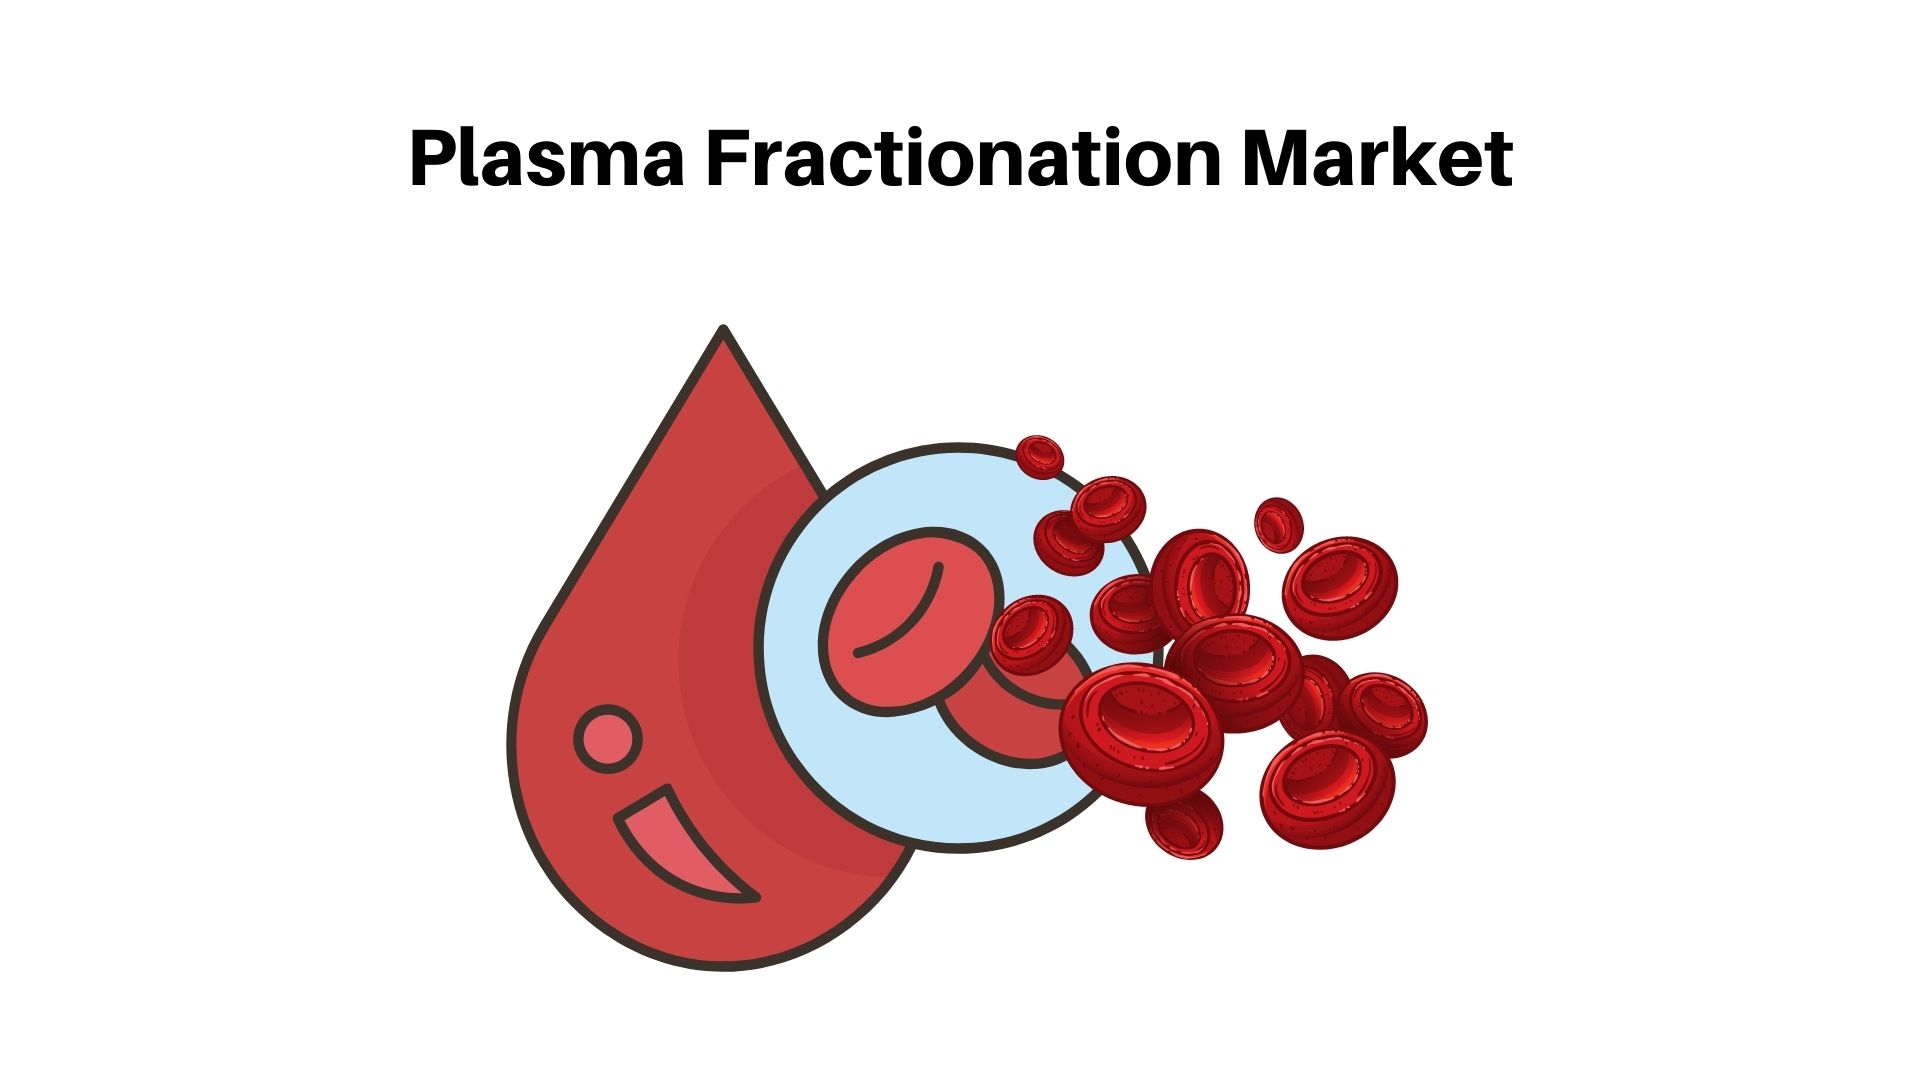 Plasma Fractionation Market is Estimated to Showcase Significant Growth of USD 57.0 Bn in 2032 With a CAGR 7.3%